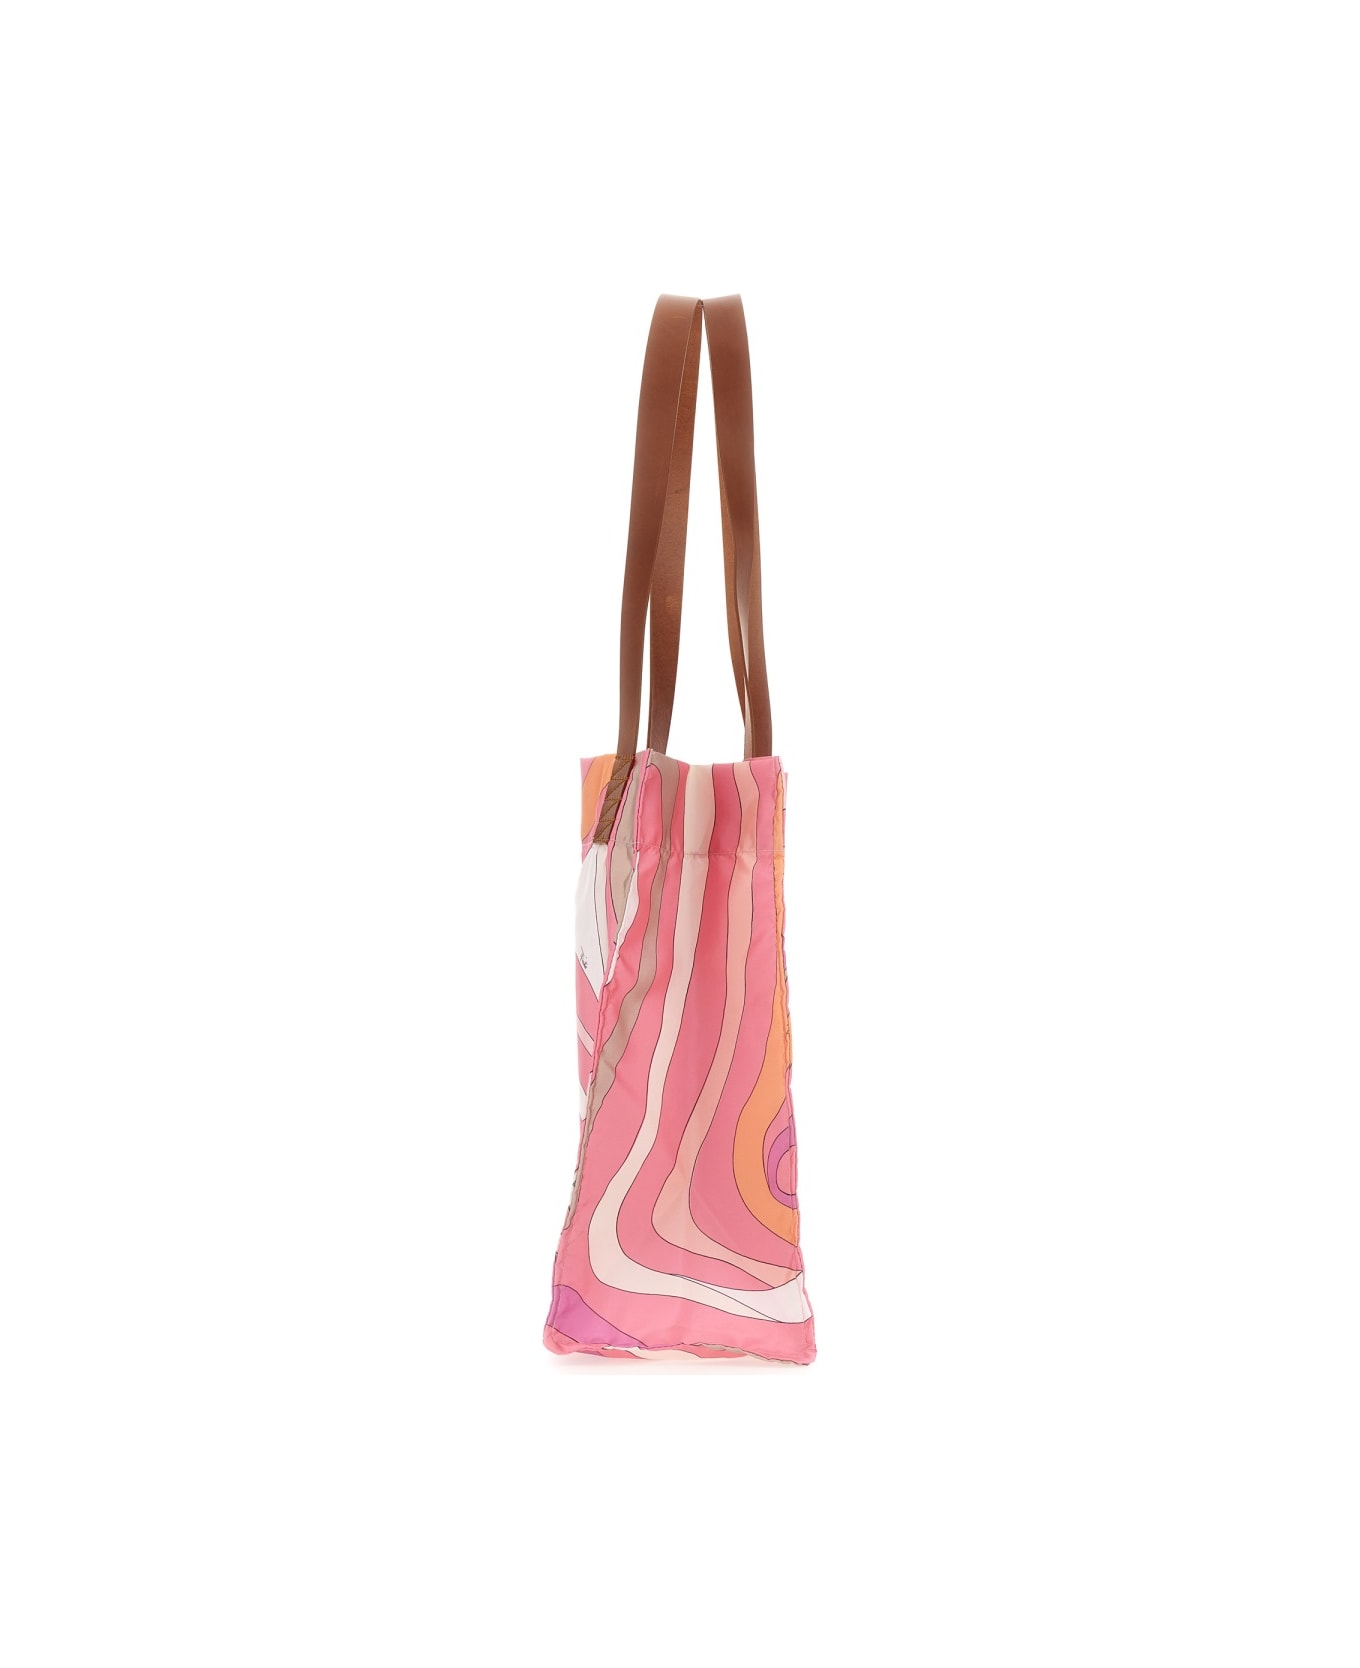 Pucci Patterned Tote Bag - ROSA